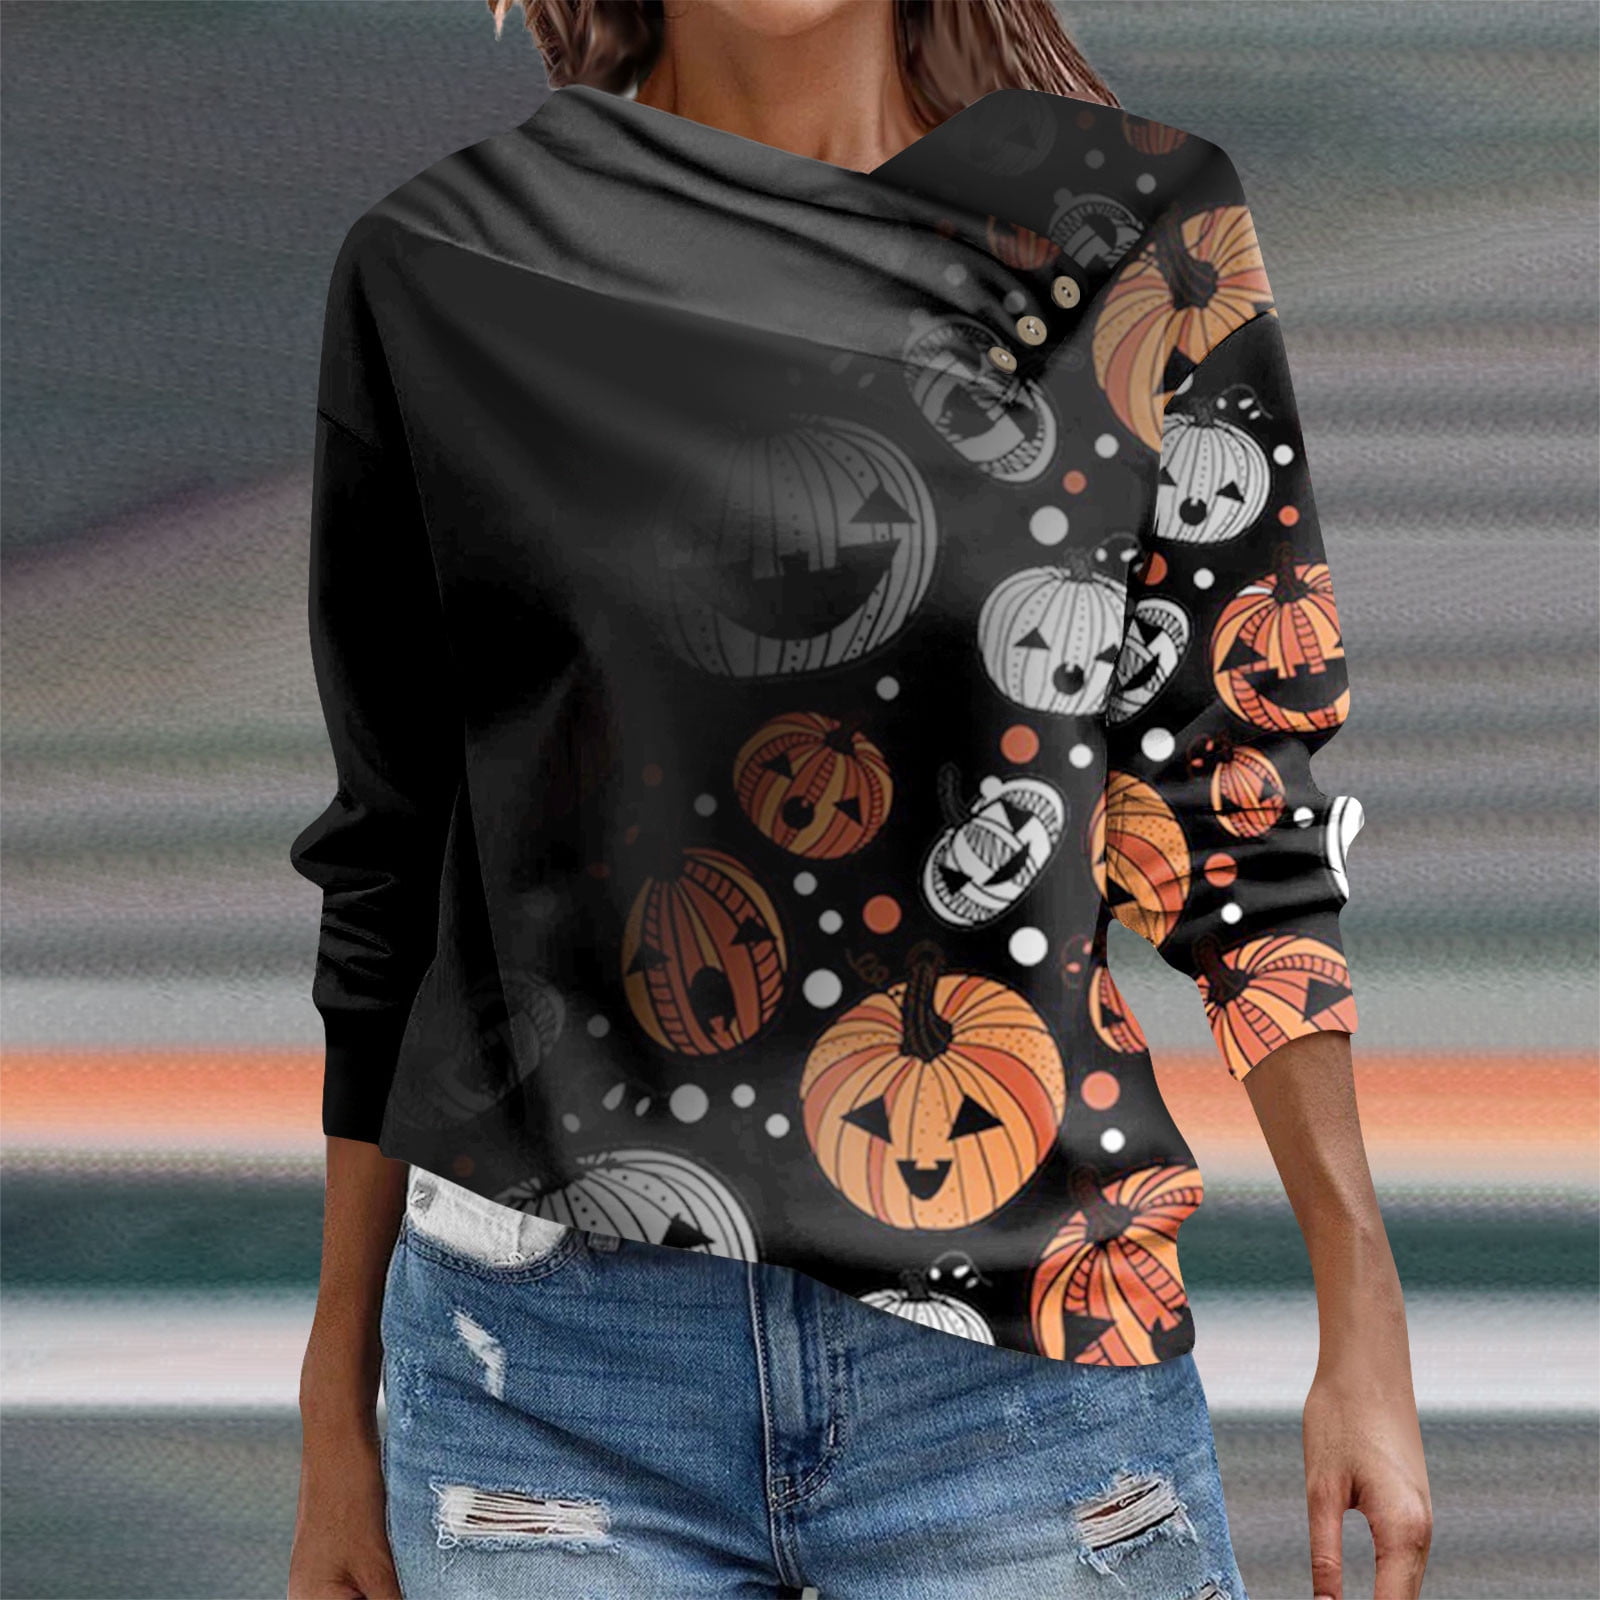  YFJRBR Deals I'm Ok It's Not My Blood Womens Printed Casual  Long Sleeve Sweatshirt Halloween Shirts For Women Plus Size Hoodies today  deals prime clearance : Clothing, Shoes & Jewelry